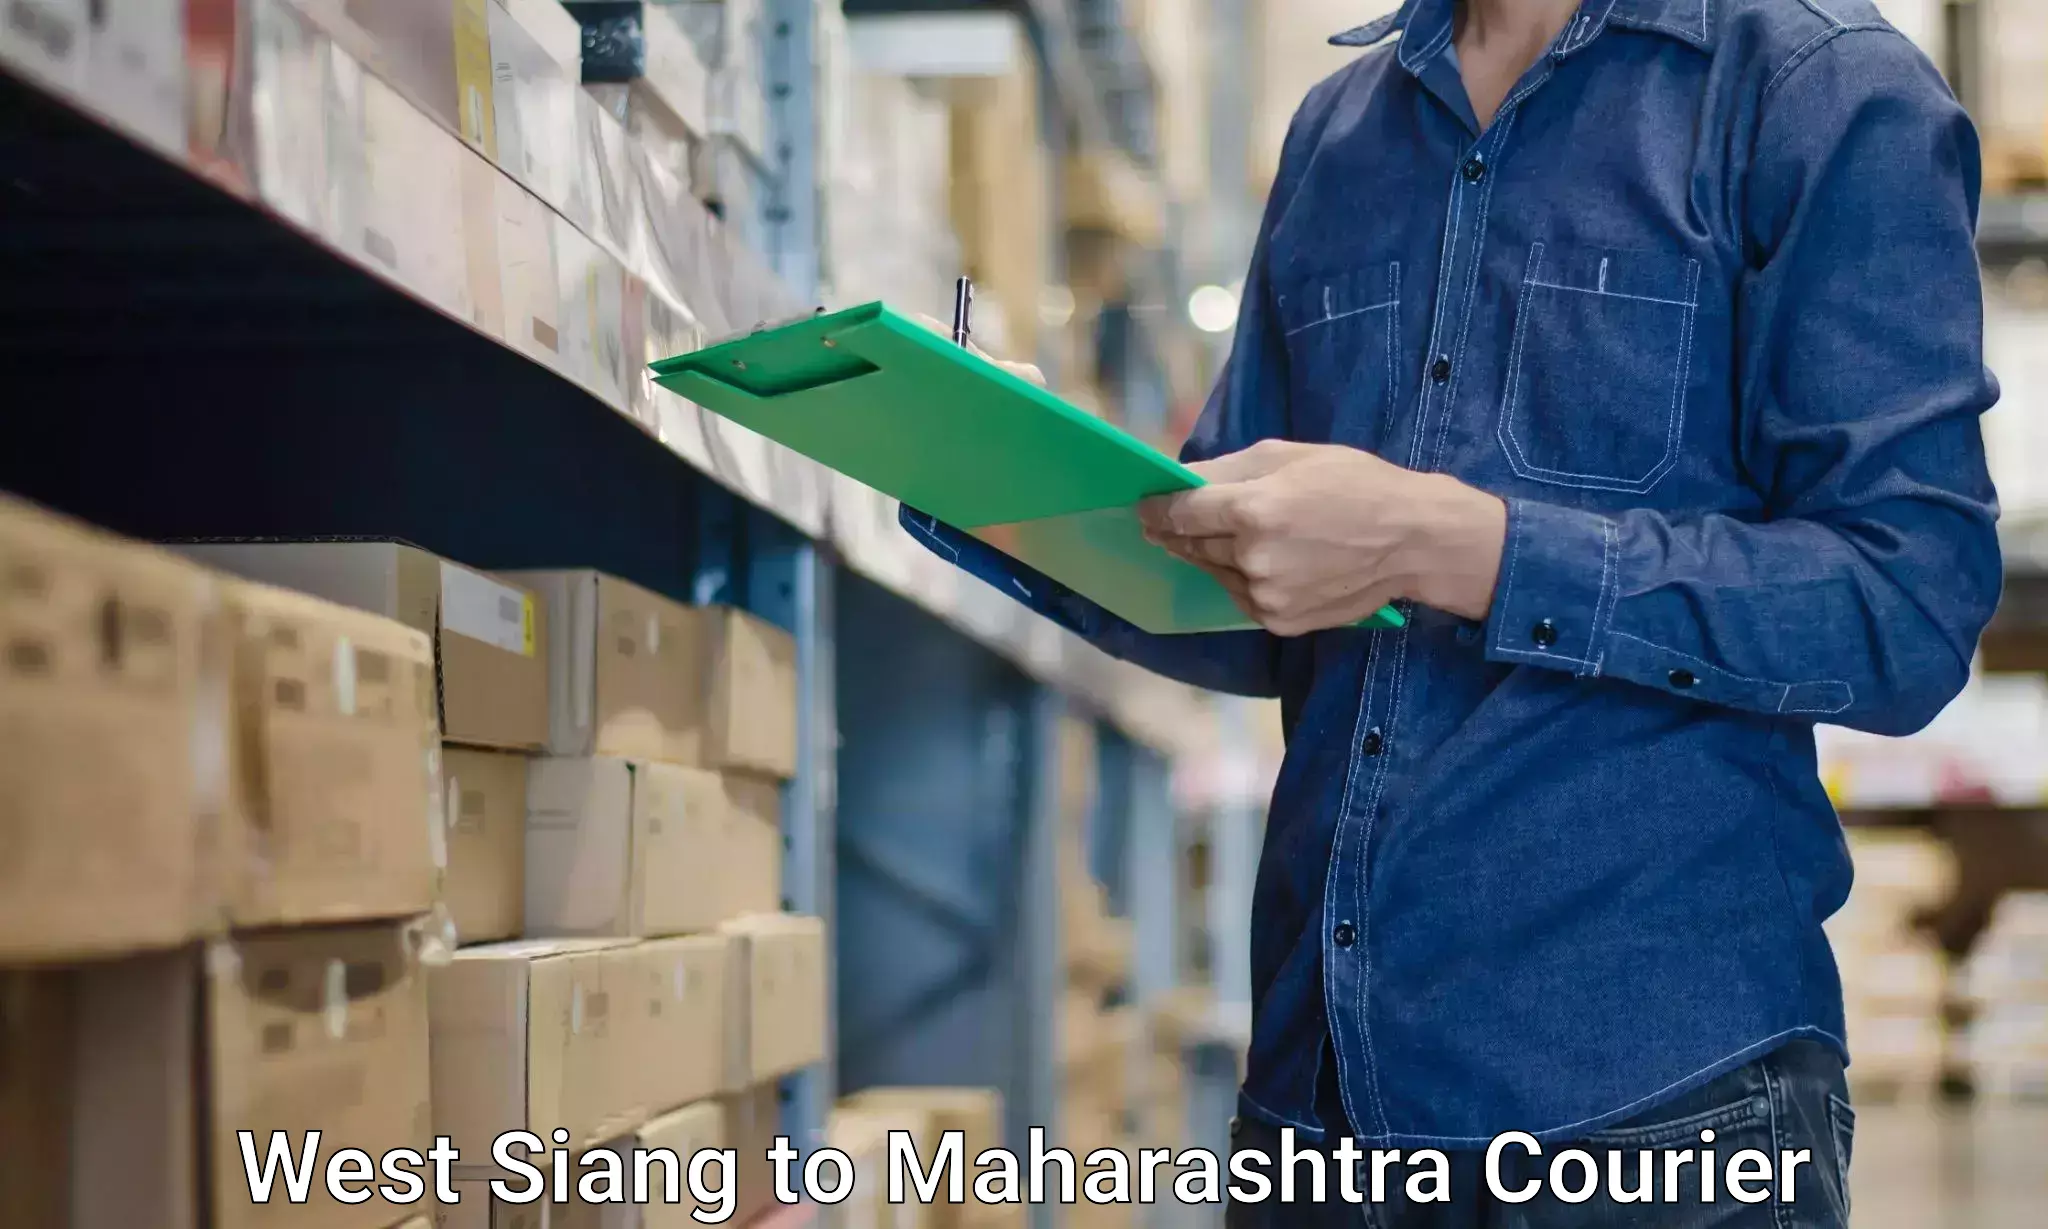 Quality moving services in West Siang to Khandala Pune